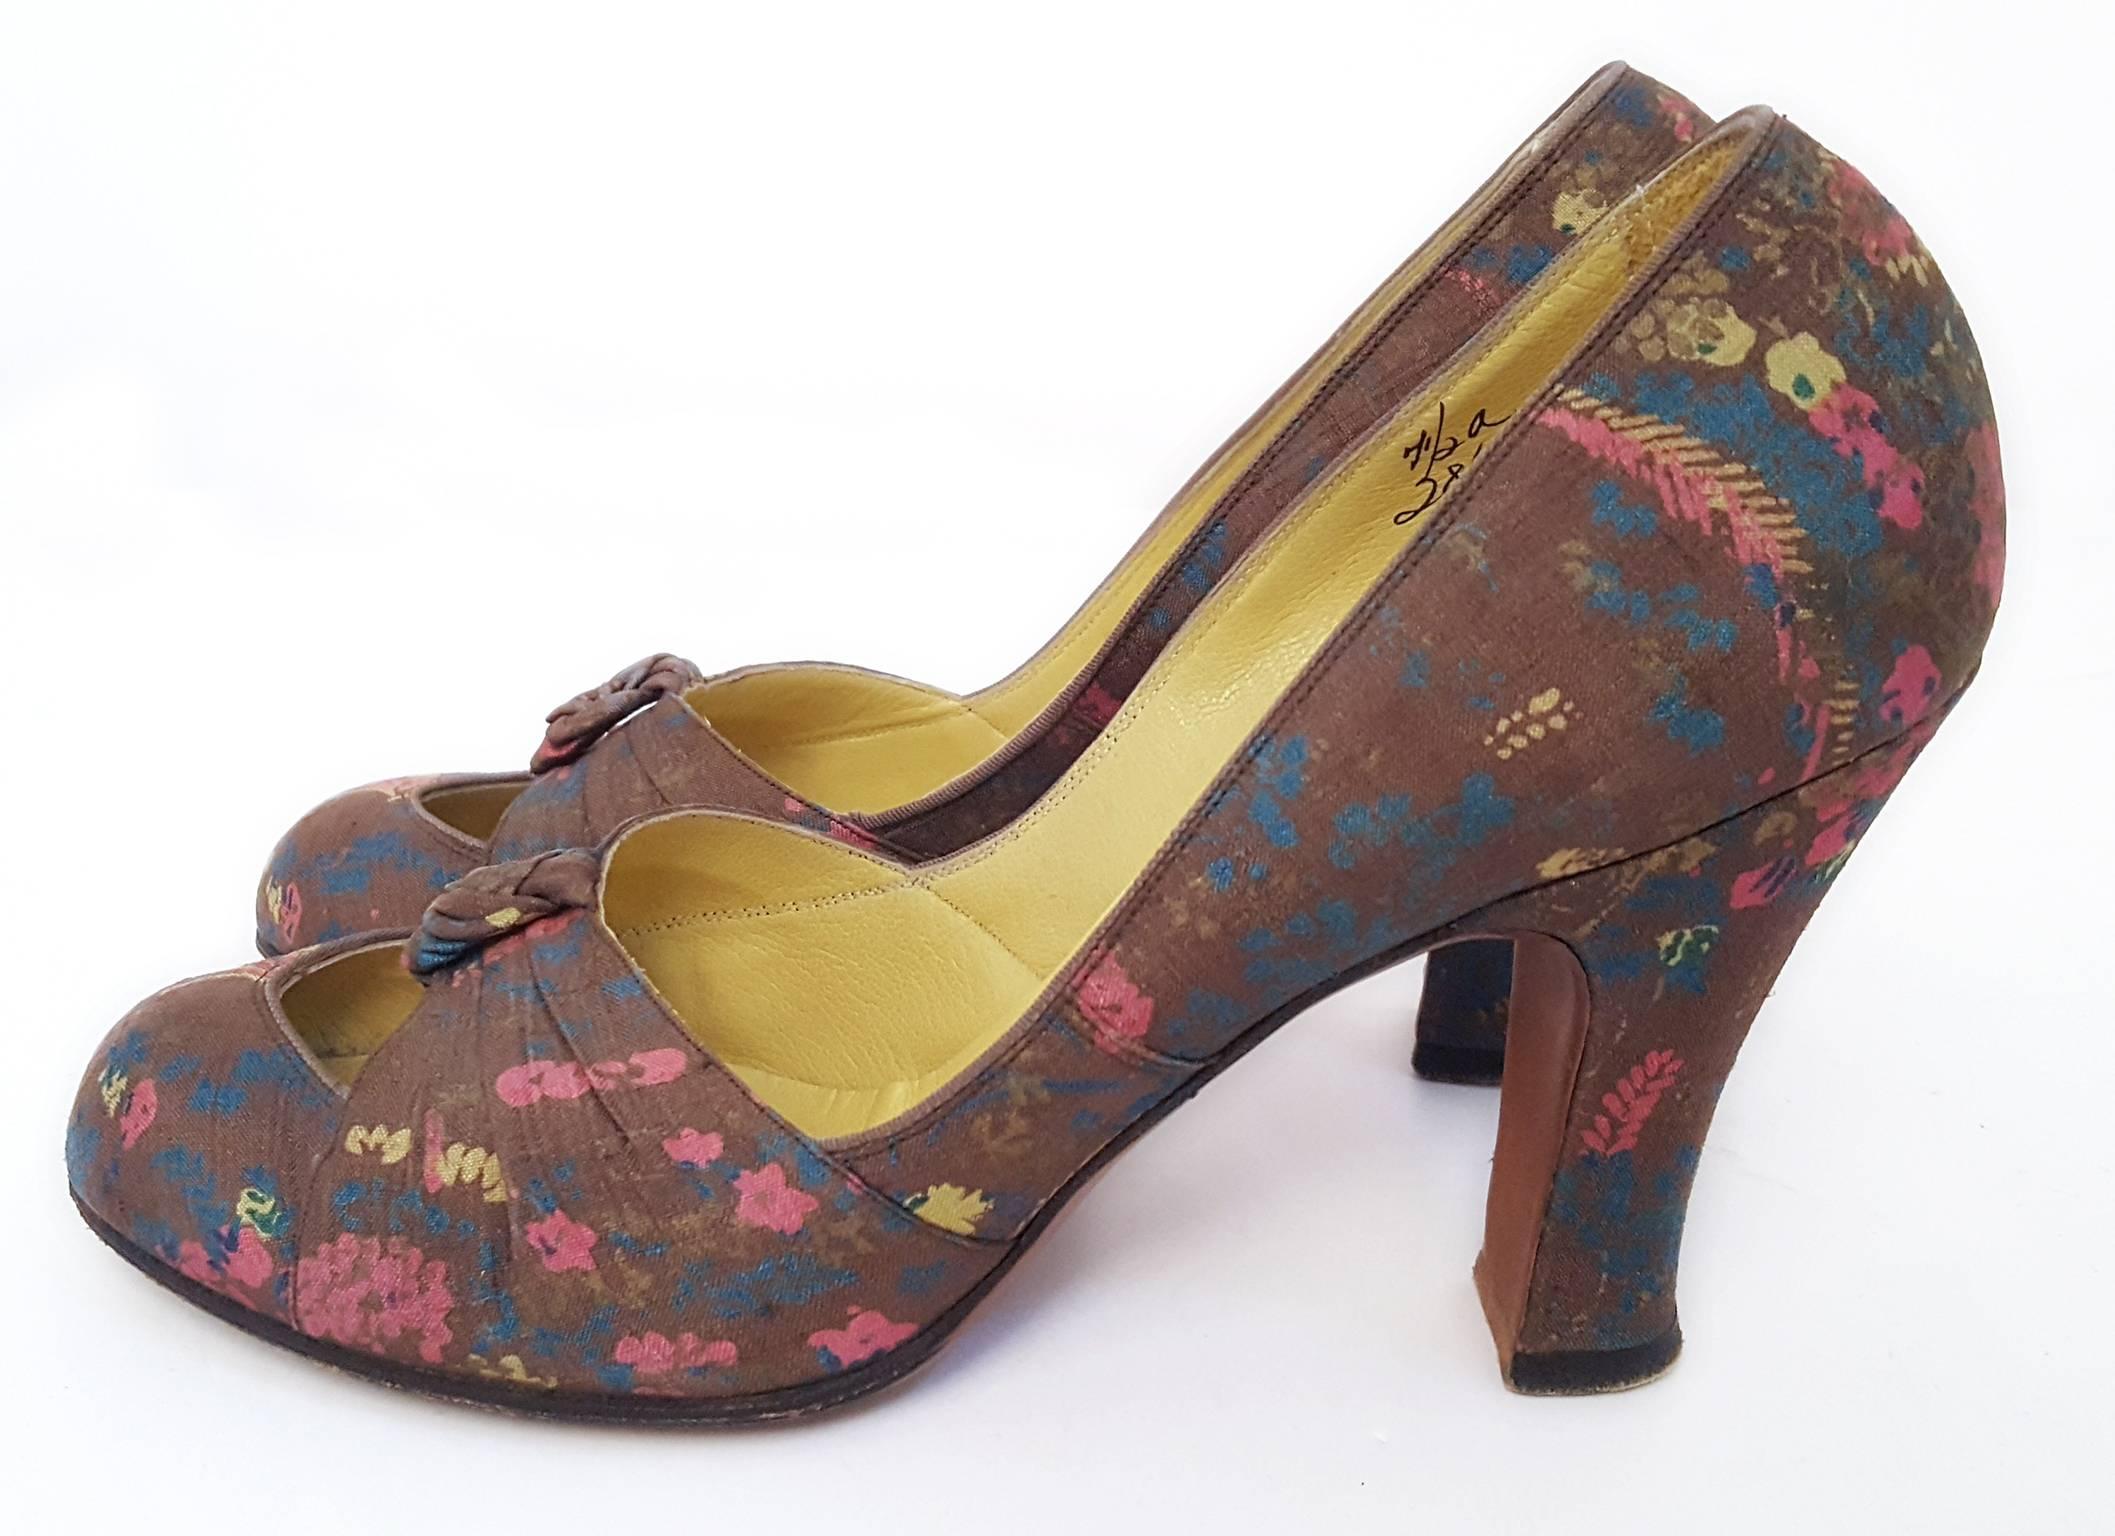 50s Satin Print Heel. Aprox size US 7 N. 

10" insole
3" palm of foot
2 1/4" heel